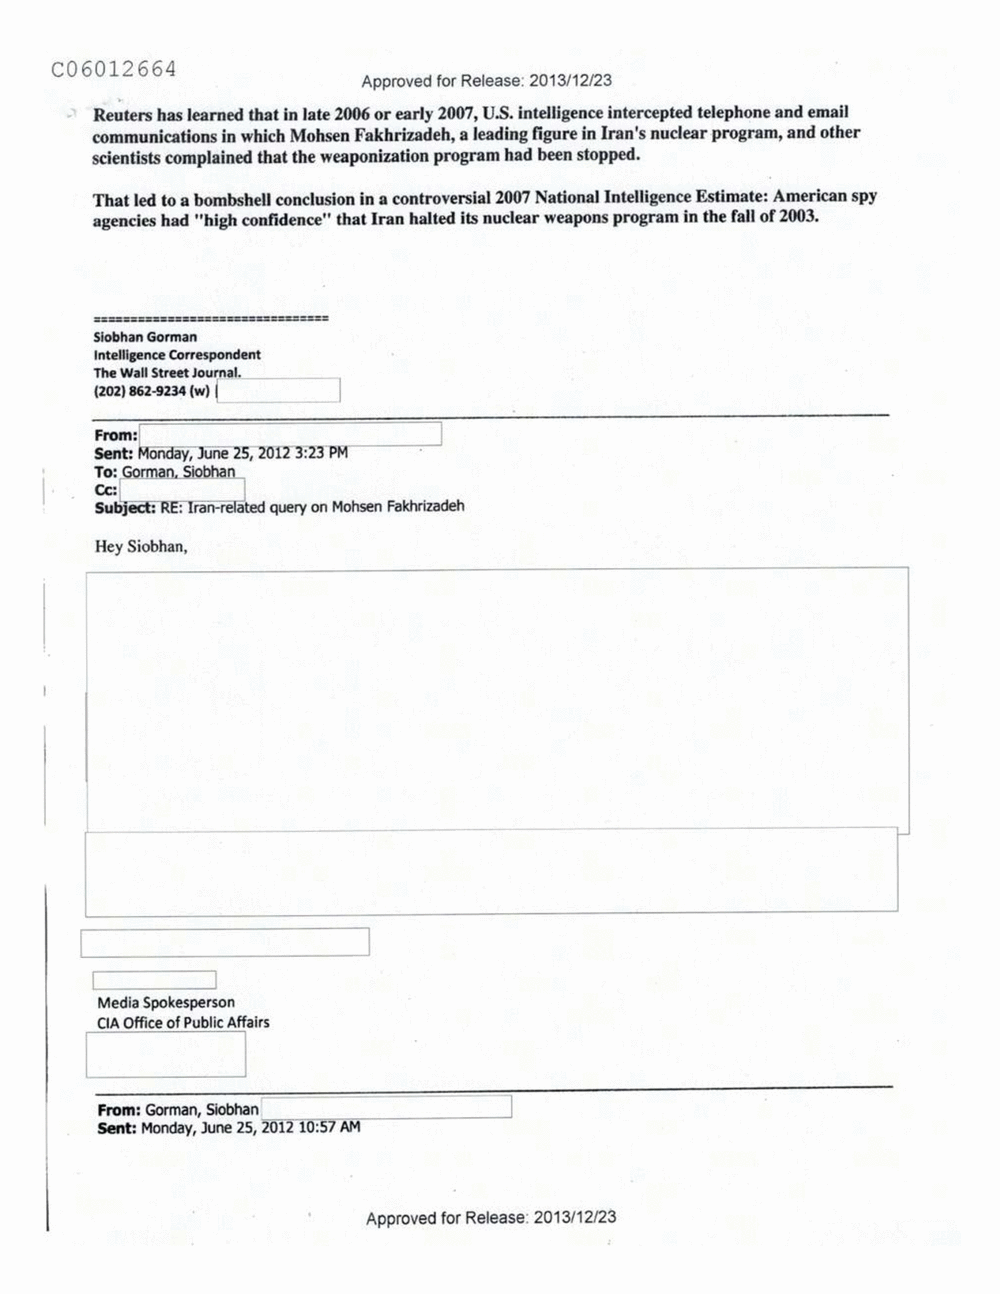 Page 244 from Email Correspondence Between Reporters and CIA Flacks